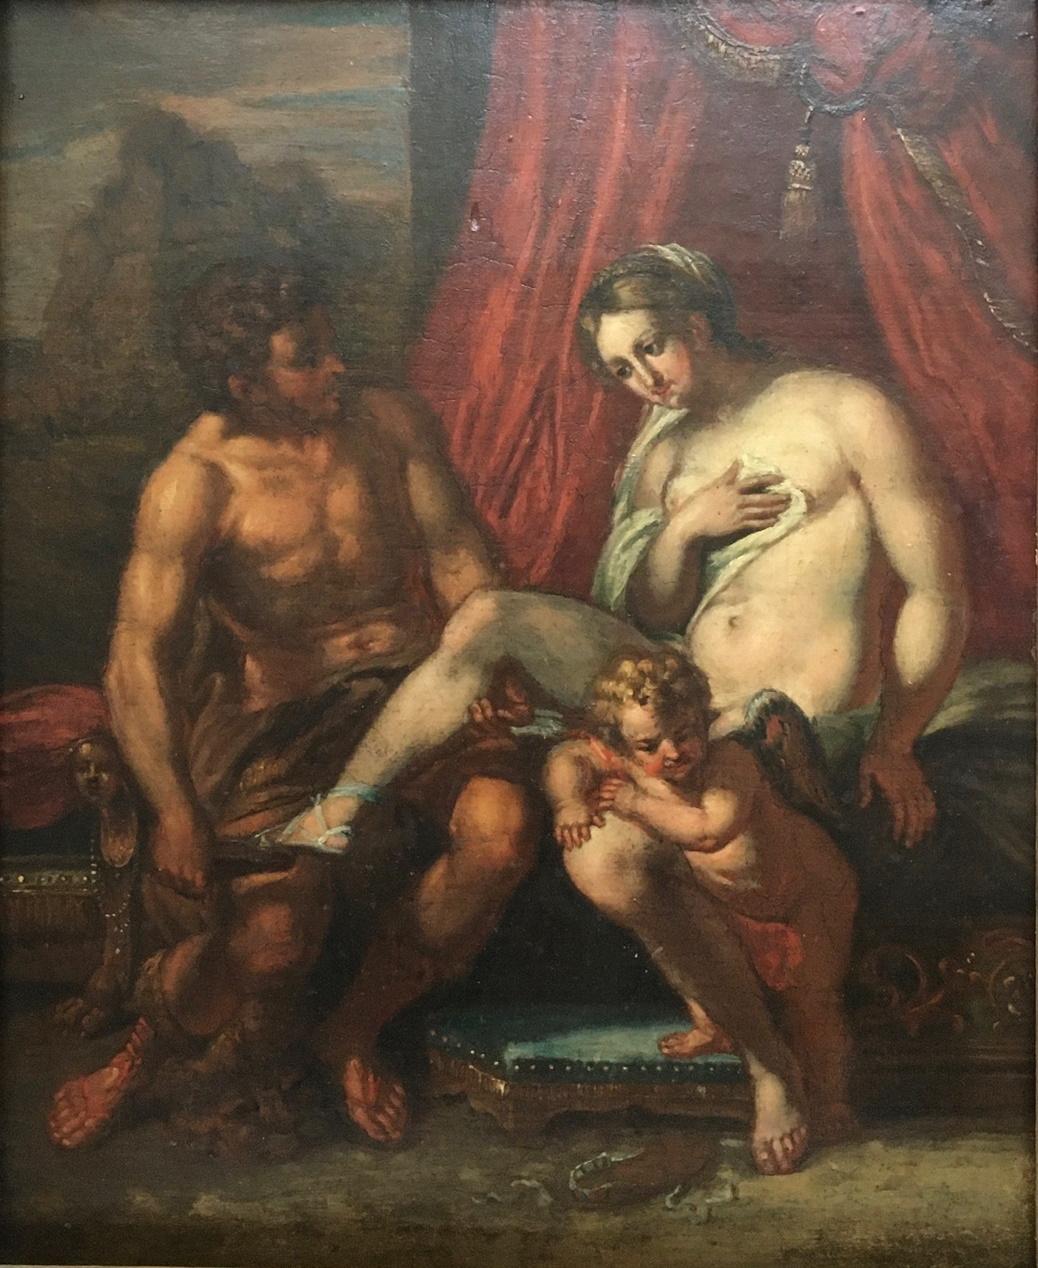 17th century Flemish painting, school of Rubens. Venus Mars and Cupid.

Exciting mythological painting of Venus, Mars and Cupid. The composition is extraordinary and captivating. Mars, the God of War, Venus’s lover and father of Cupid is literally